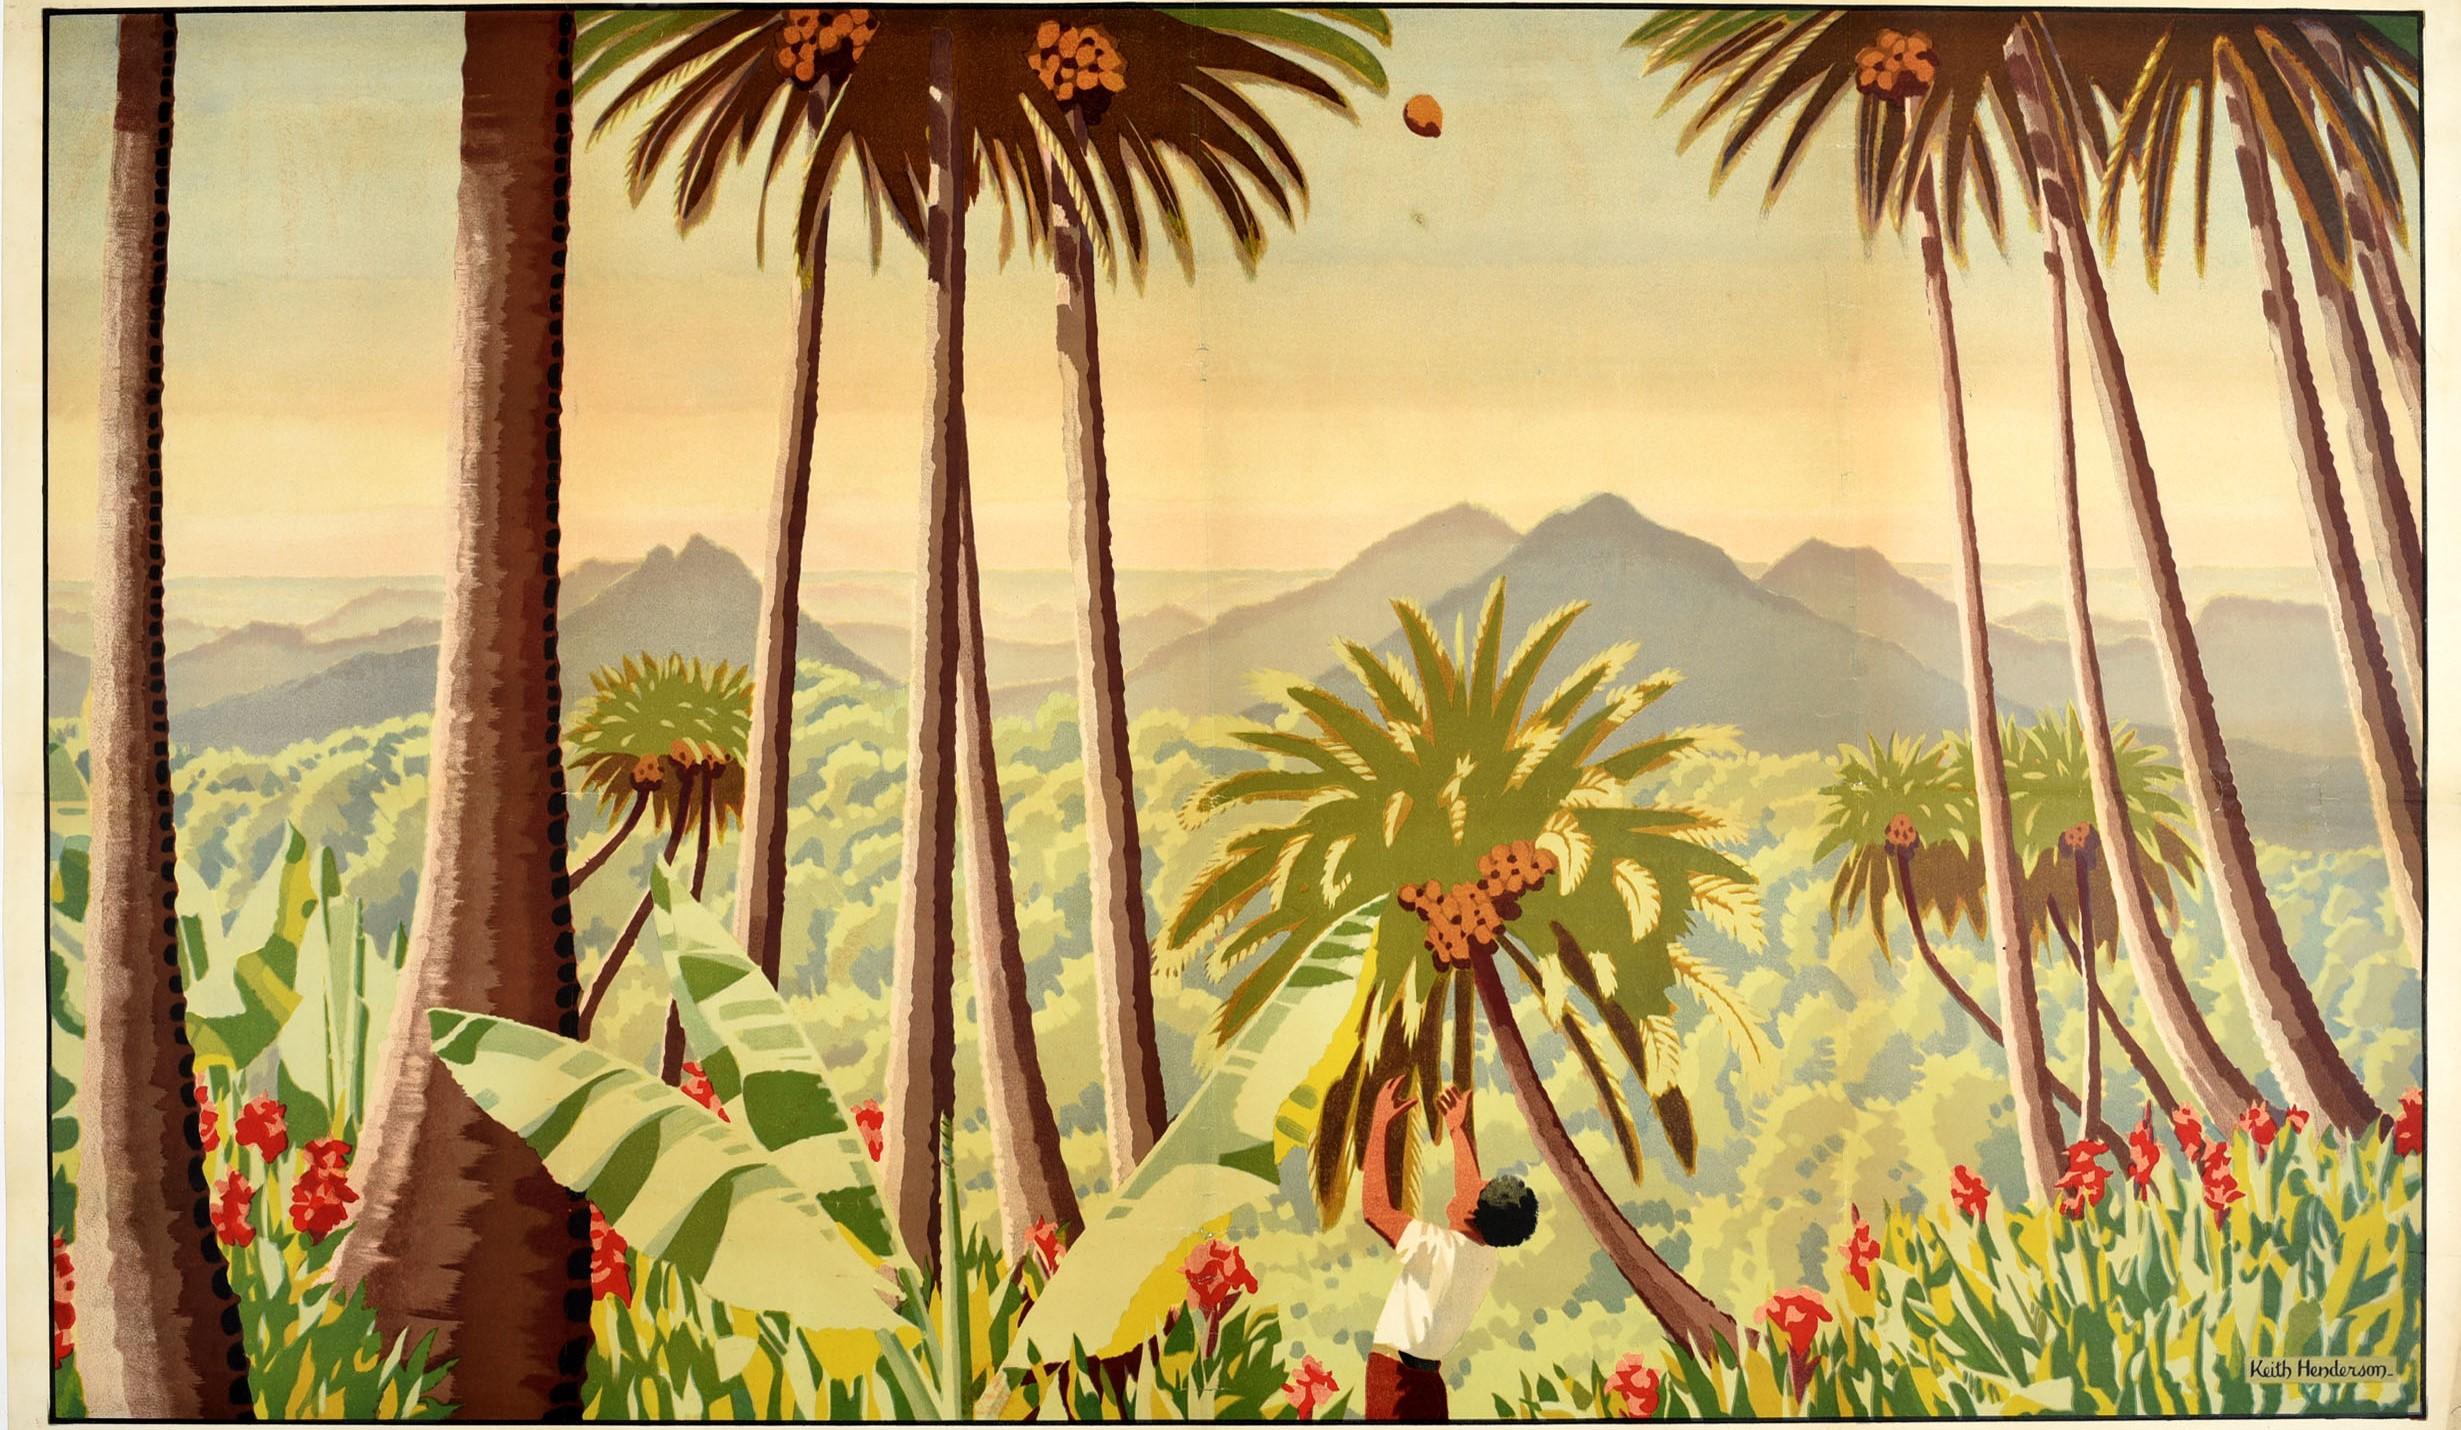 Original vintage Empire Marketing Board poster - Fiji Copra Pineapples Bananas Sugar - showing a plantation worker reaching up to catch a falling coconut in front of coconut trees with jungle flowers and banana tree leaves in the foreground and the